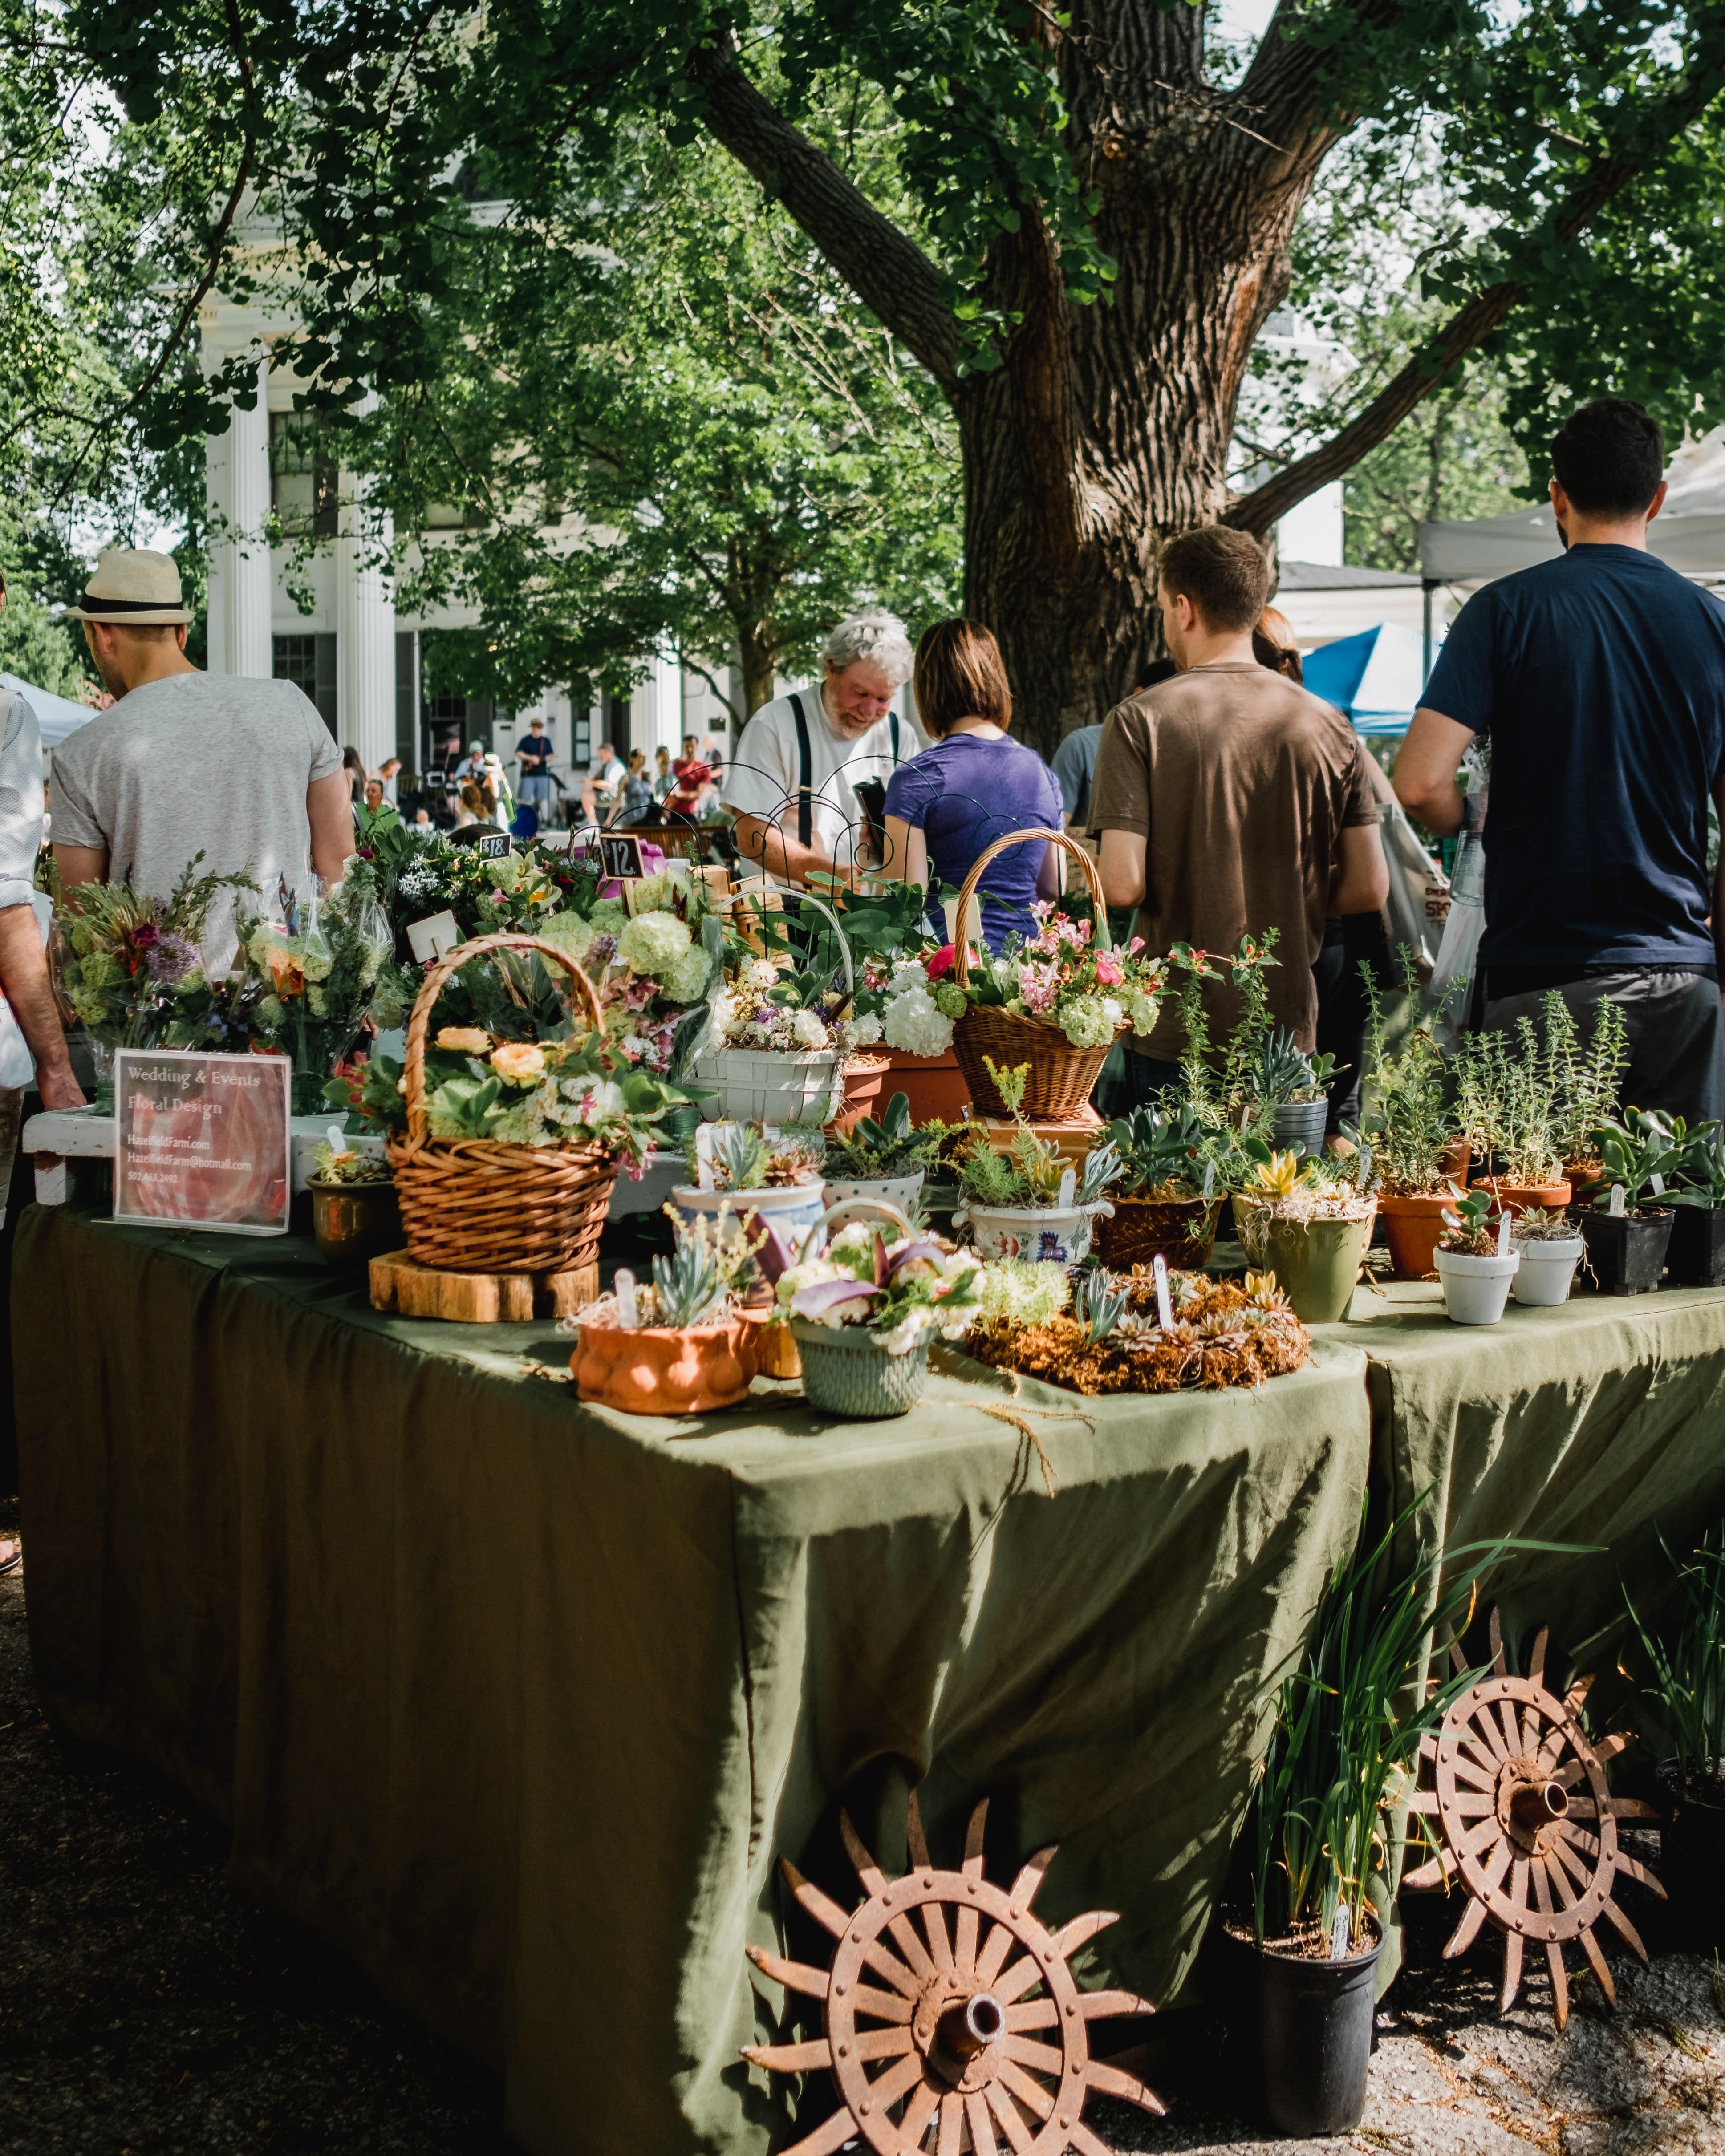 A farmers market with people and tables holding plants, fresh flowers, and produce under a large tree